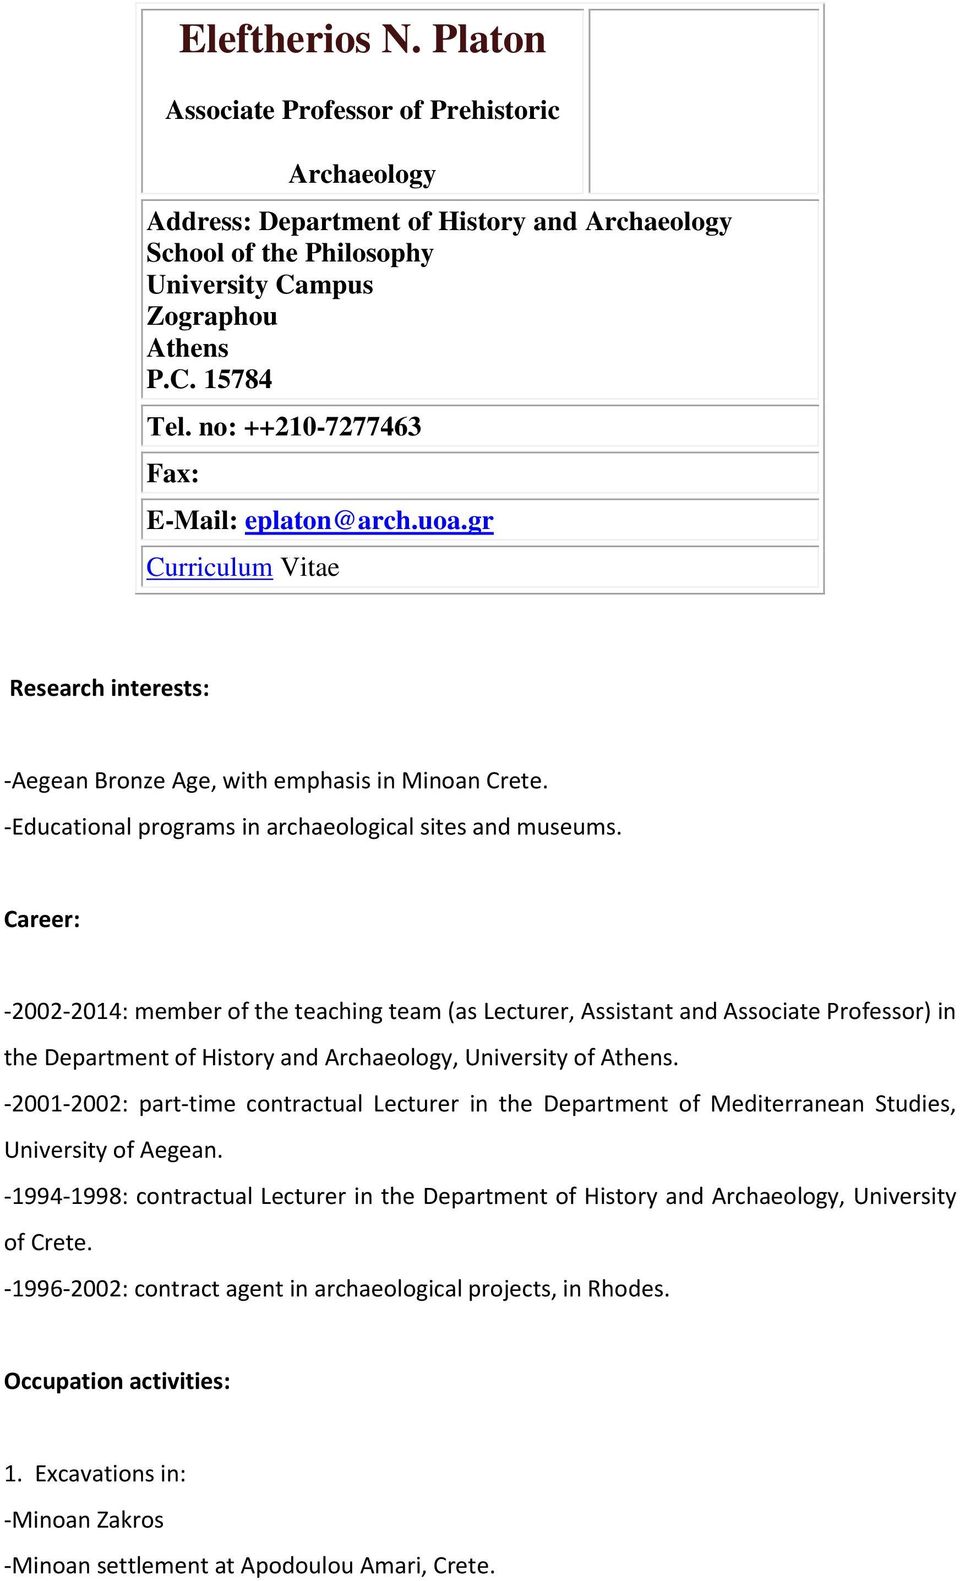 Career: -2002-2014: member of the teaching team (as Lecturer, Assistant and Associate Professor) in the Department of History and Archaeology, University of Athens.